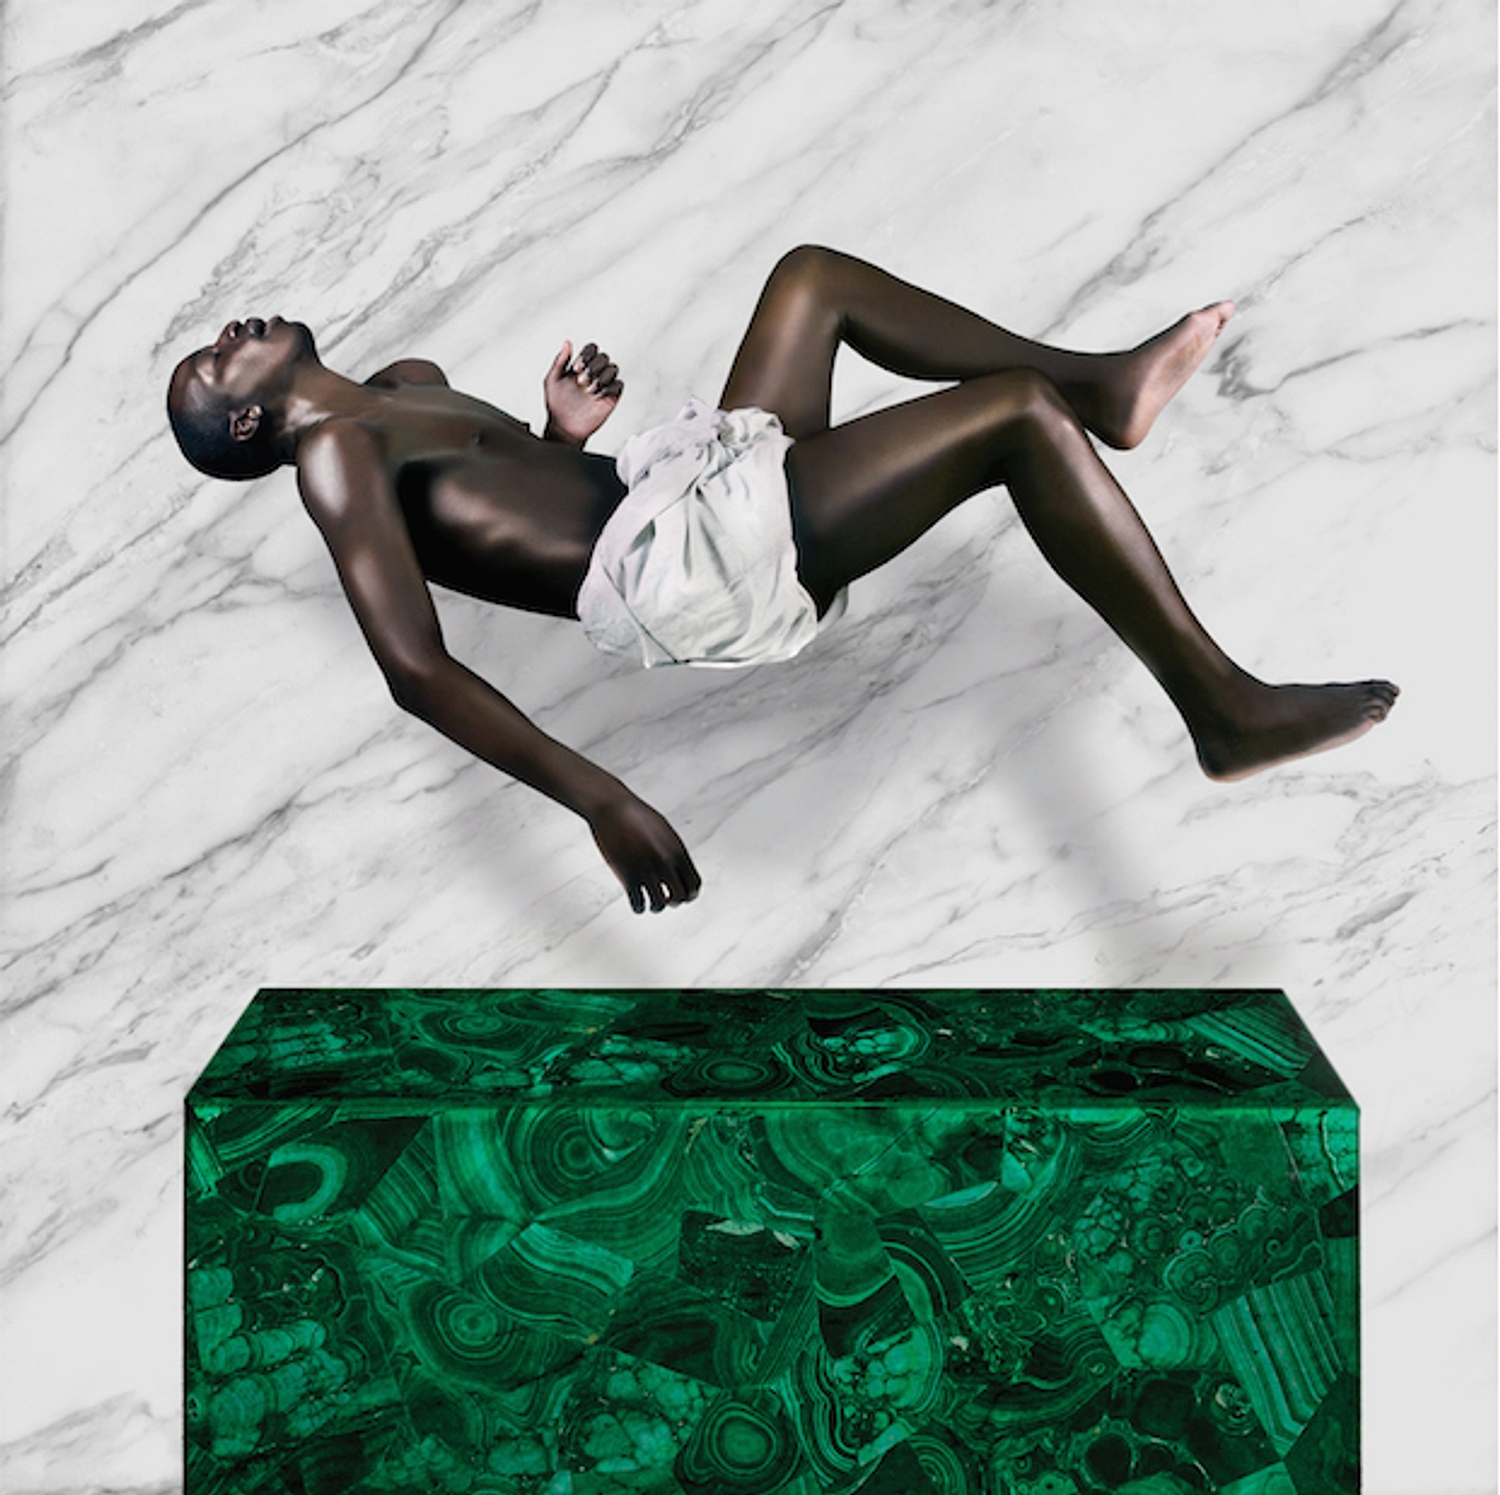 A beautiful mind - Petite Noir: "Giving the music a different environment changes it"